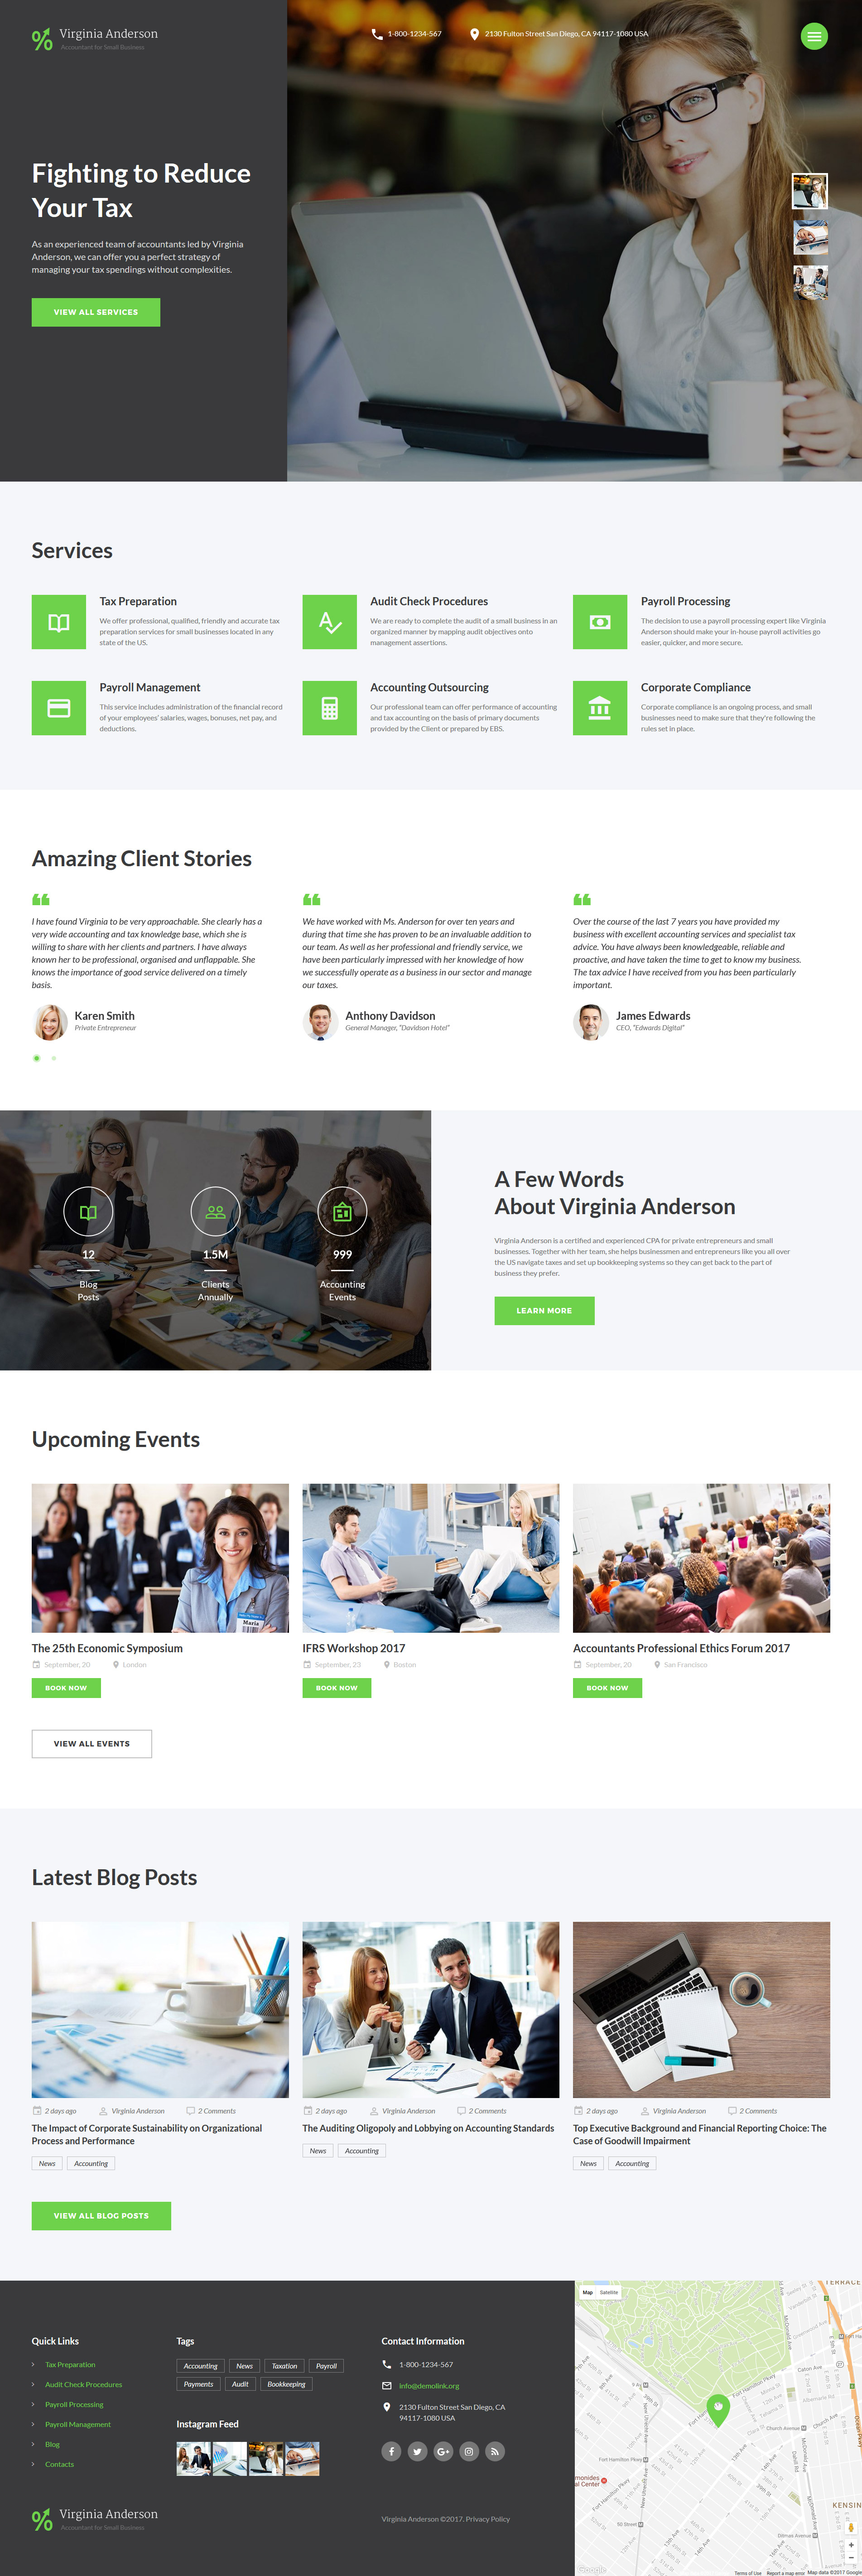 Virginia Anderson - Accountant for Small Business Multipage Website Template